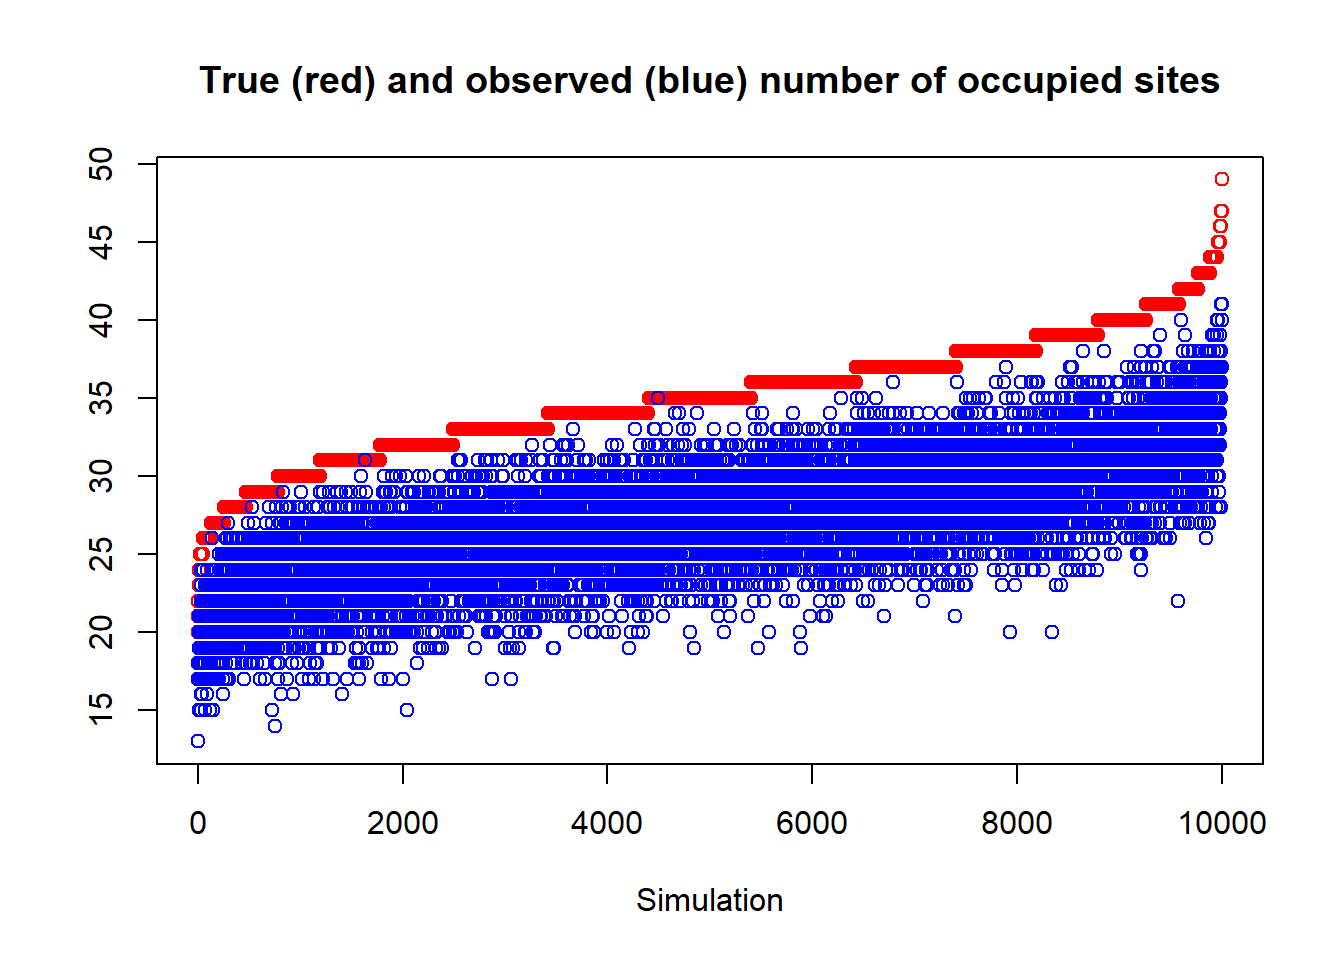 Natural variability (sampling error) of the true number of occupied sites (ordered by size) in red and the observed number of occupied sites (in blue). The number of sites observed/total is also known as the naïve occupancy of deer occurrence at 60 sites in the simulation. The width of the blue area represents the error induced by imperfect detection. Note the importance of taking this error into account to get a better idea of the occupation.